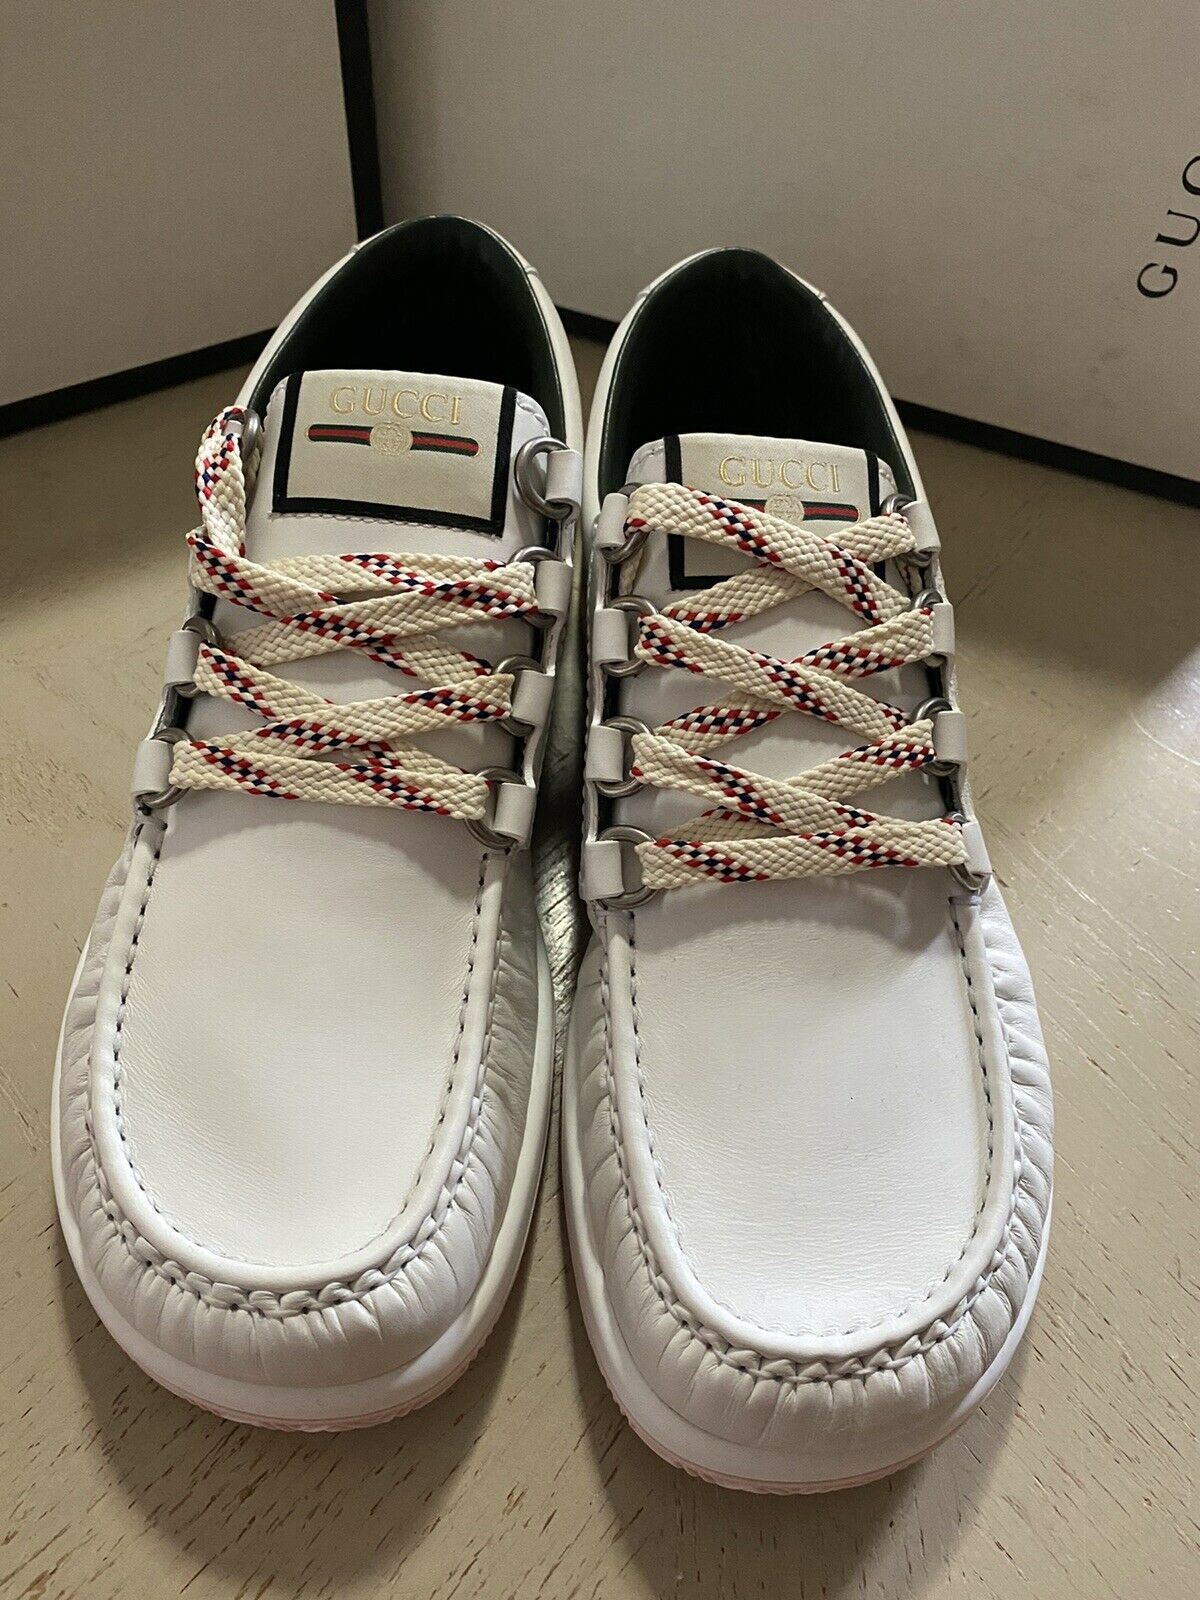 New Gucci Men’s Leather Sneakers Shoes White 11 US ( 10 UK ) Italy